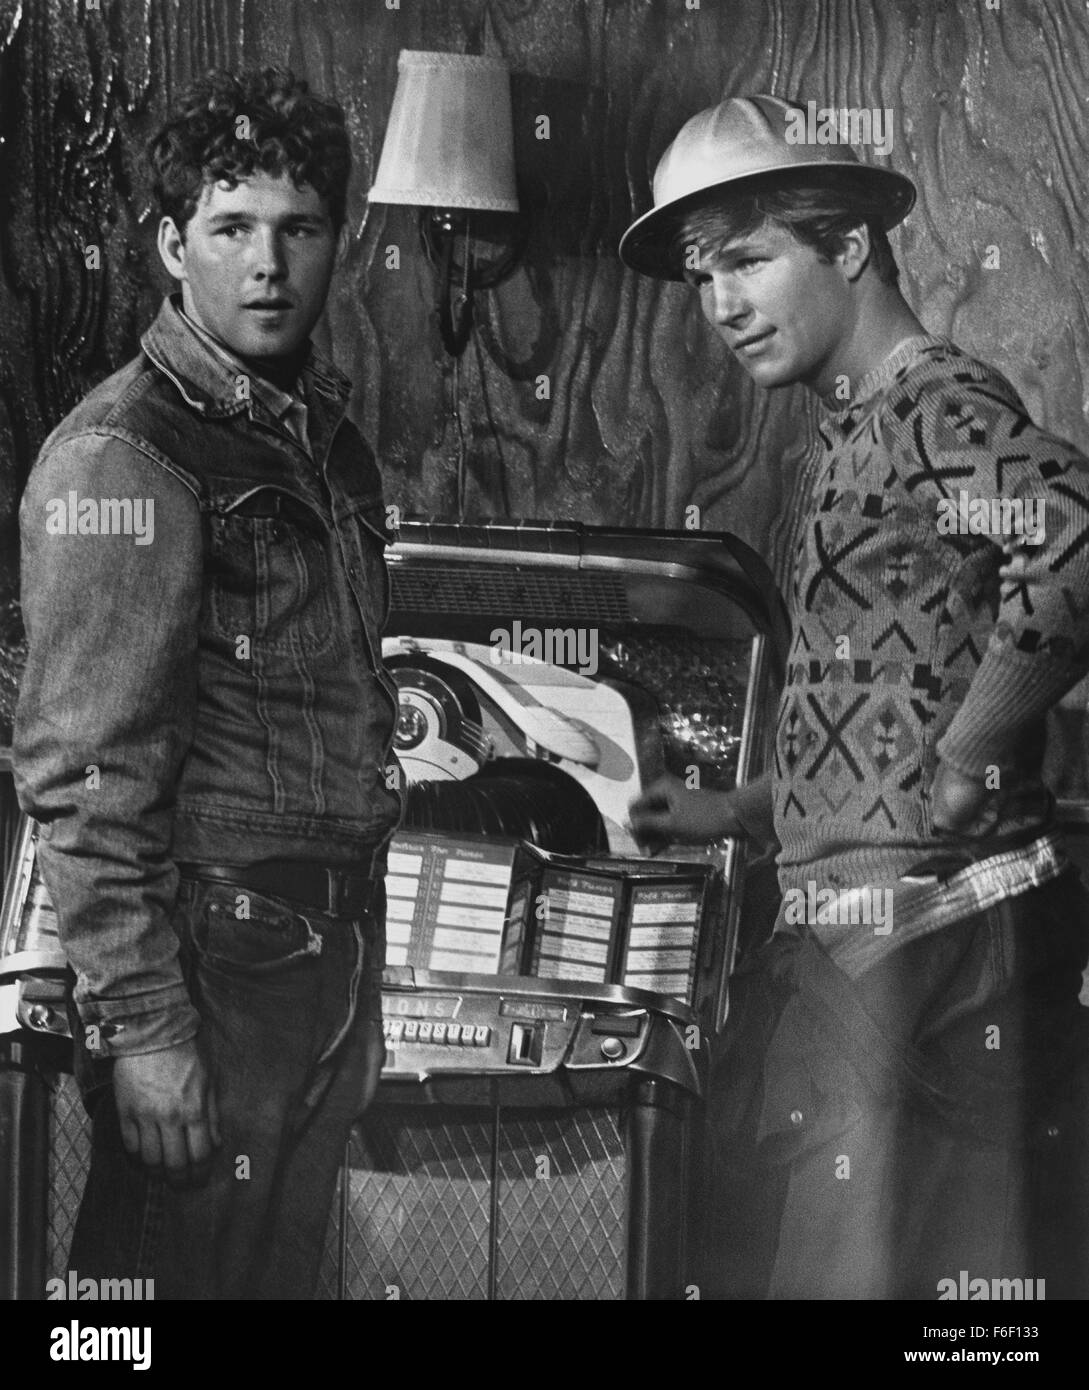 Oct 03, 1971; Archer City, TX, USA; From director Peter Bogdanovich and Columbia Pictures comes, 'The Last Picture Show,' a the story of three teenagers growing up in a small town in Texas during the 50's and the life choices they must make. Pictured is JEFF BRIDGES (right) as Duane Jackson and TIMOTHY BOTTOMS as Sonny Crawford. Stock Photo